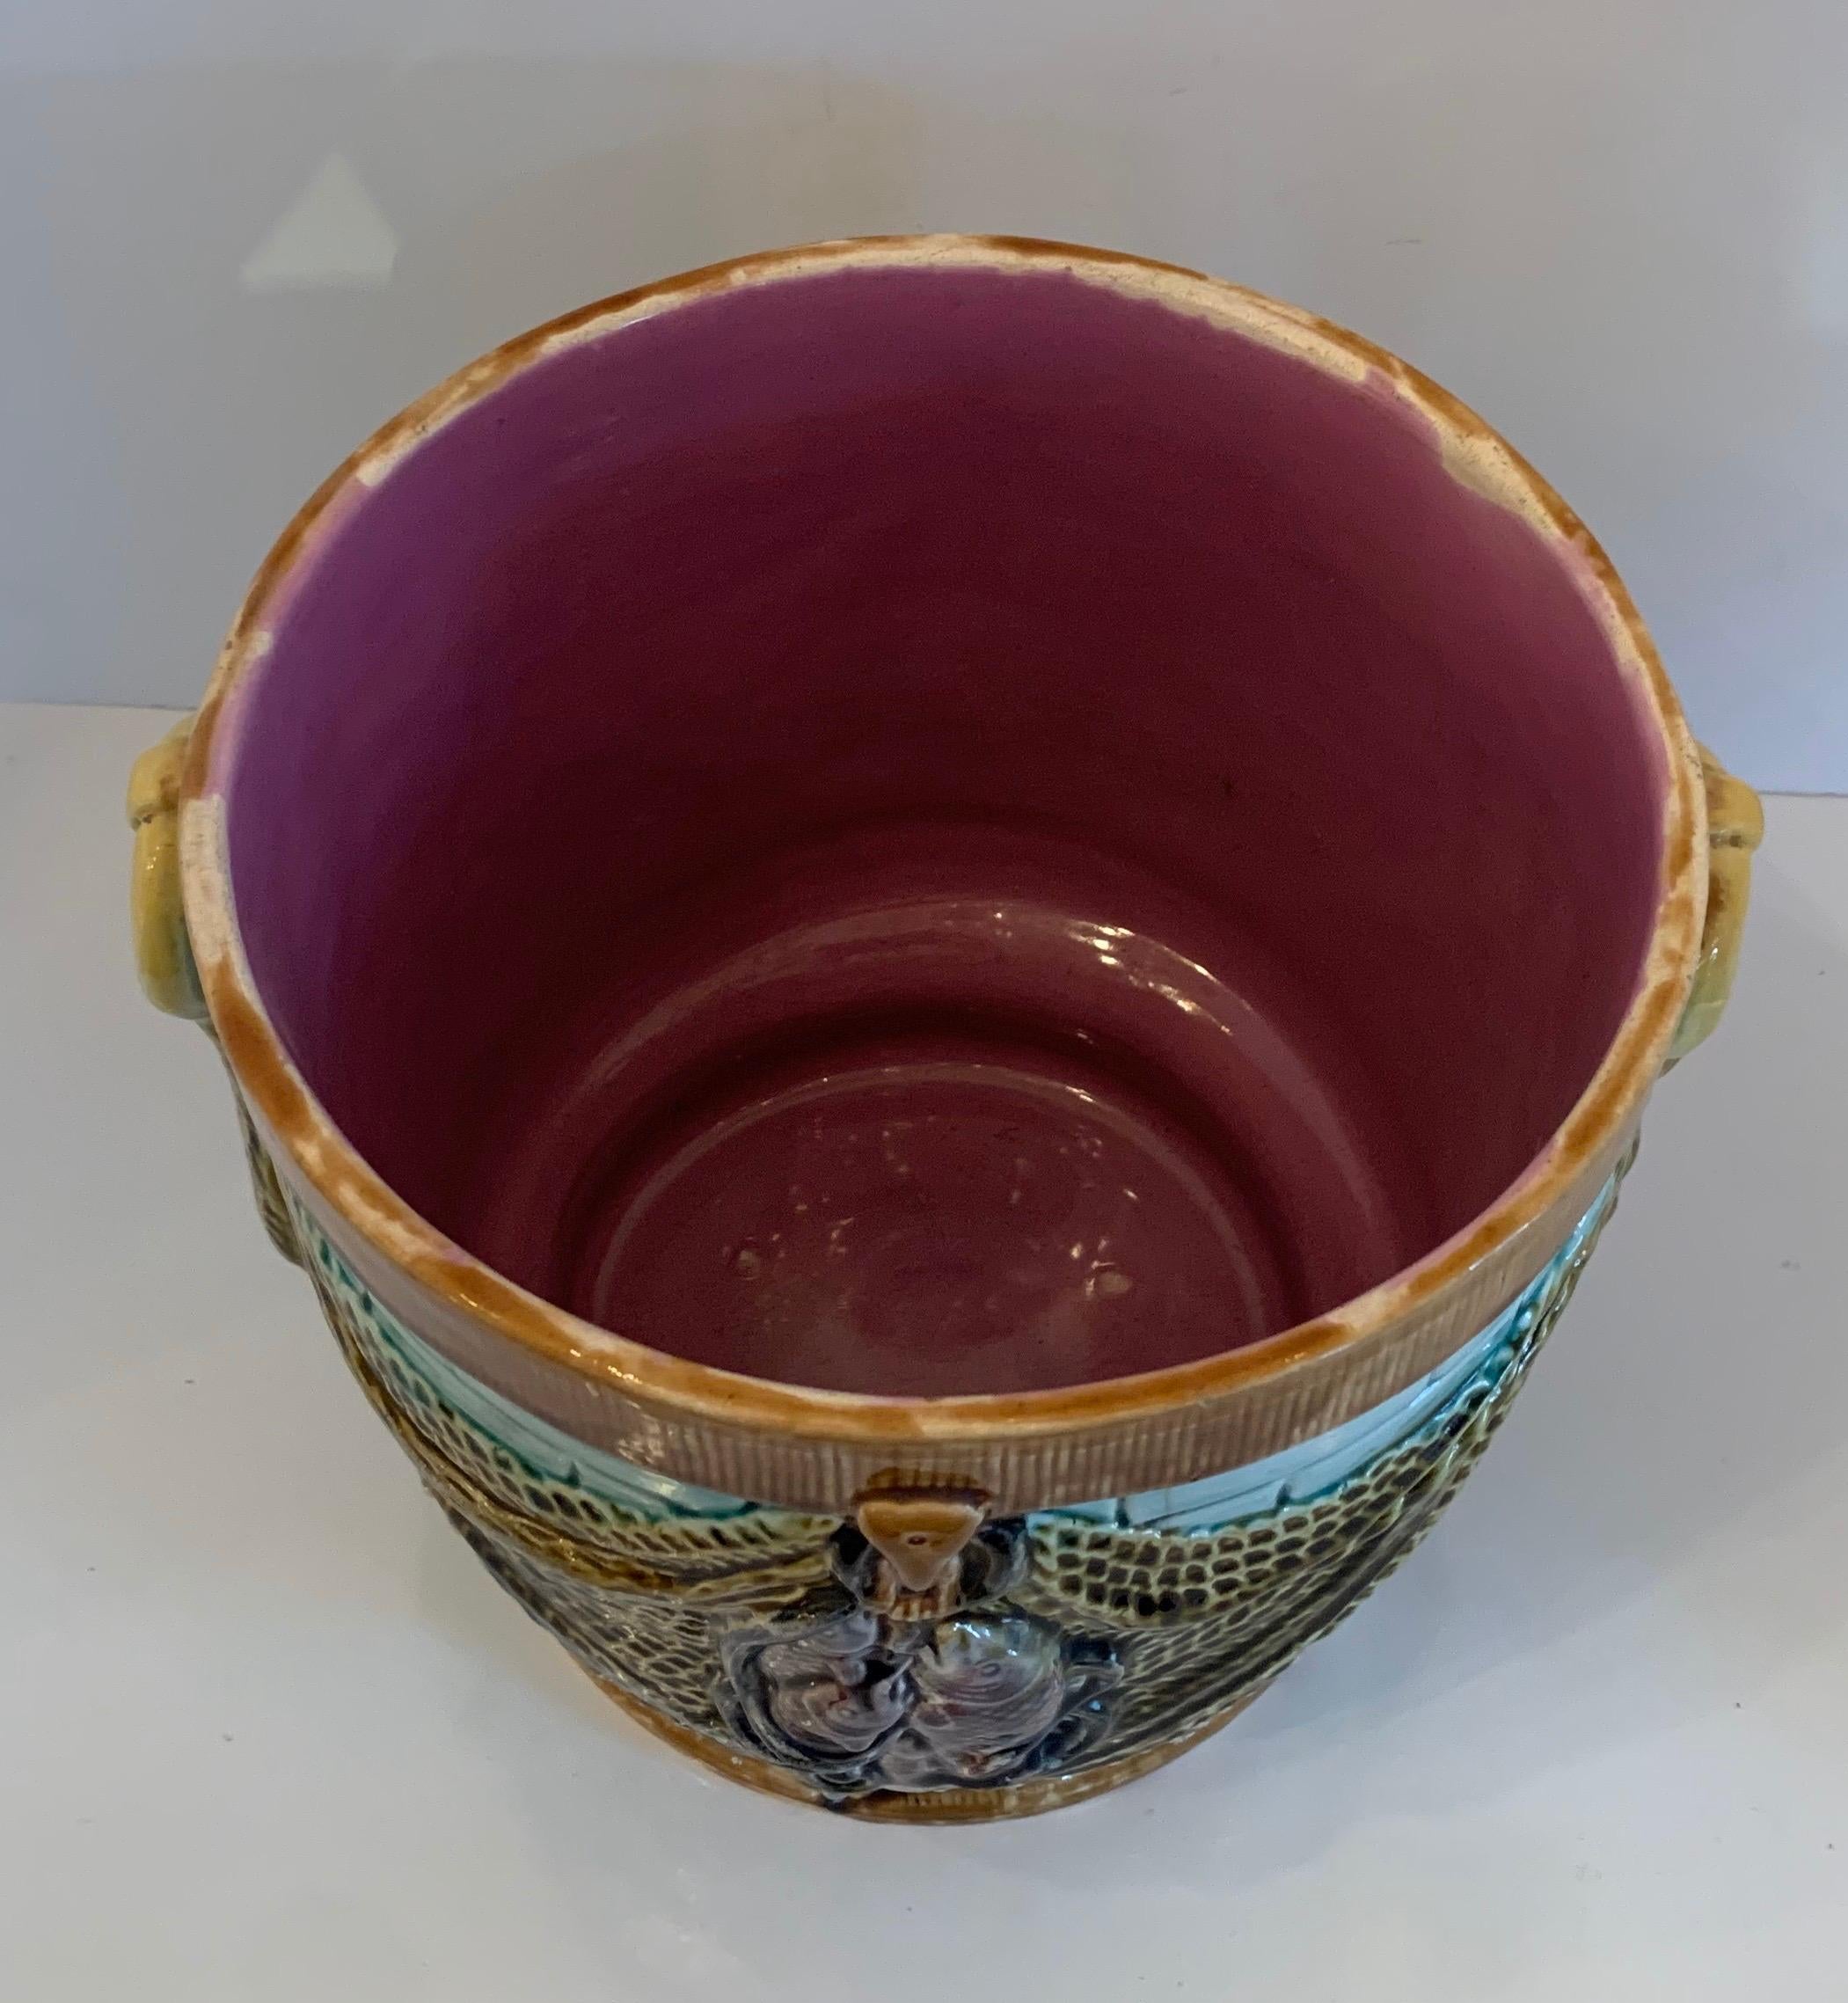 A wonderful Majolica jardinière centerpiece bowl cachepot planter with fish accents over draped fabric leading to ring handles on each side.
  